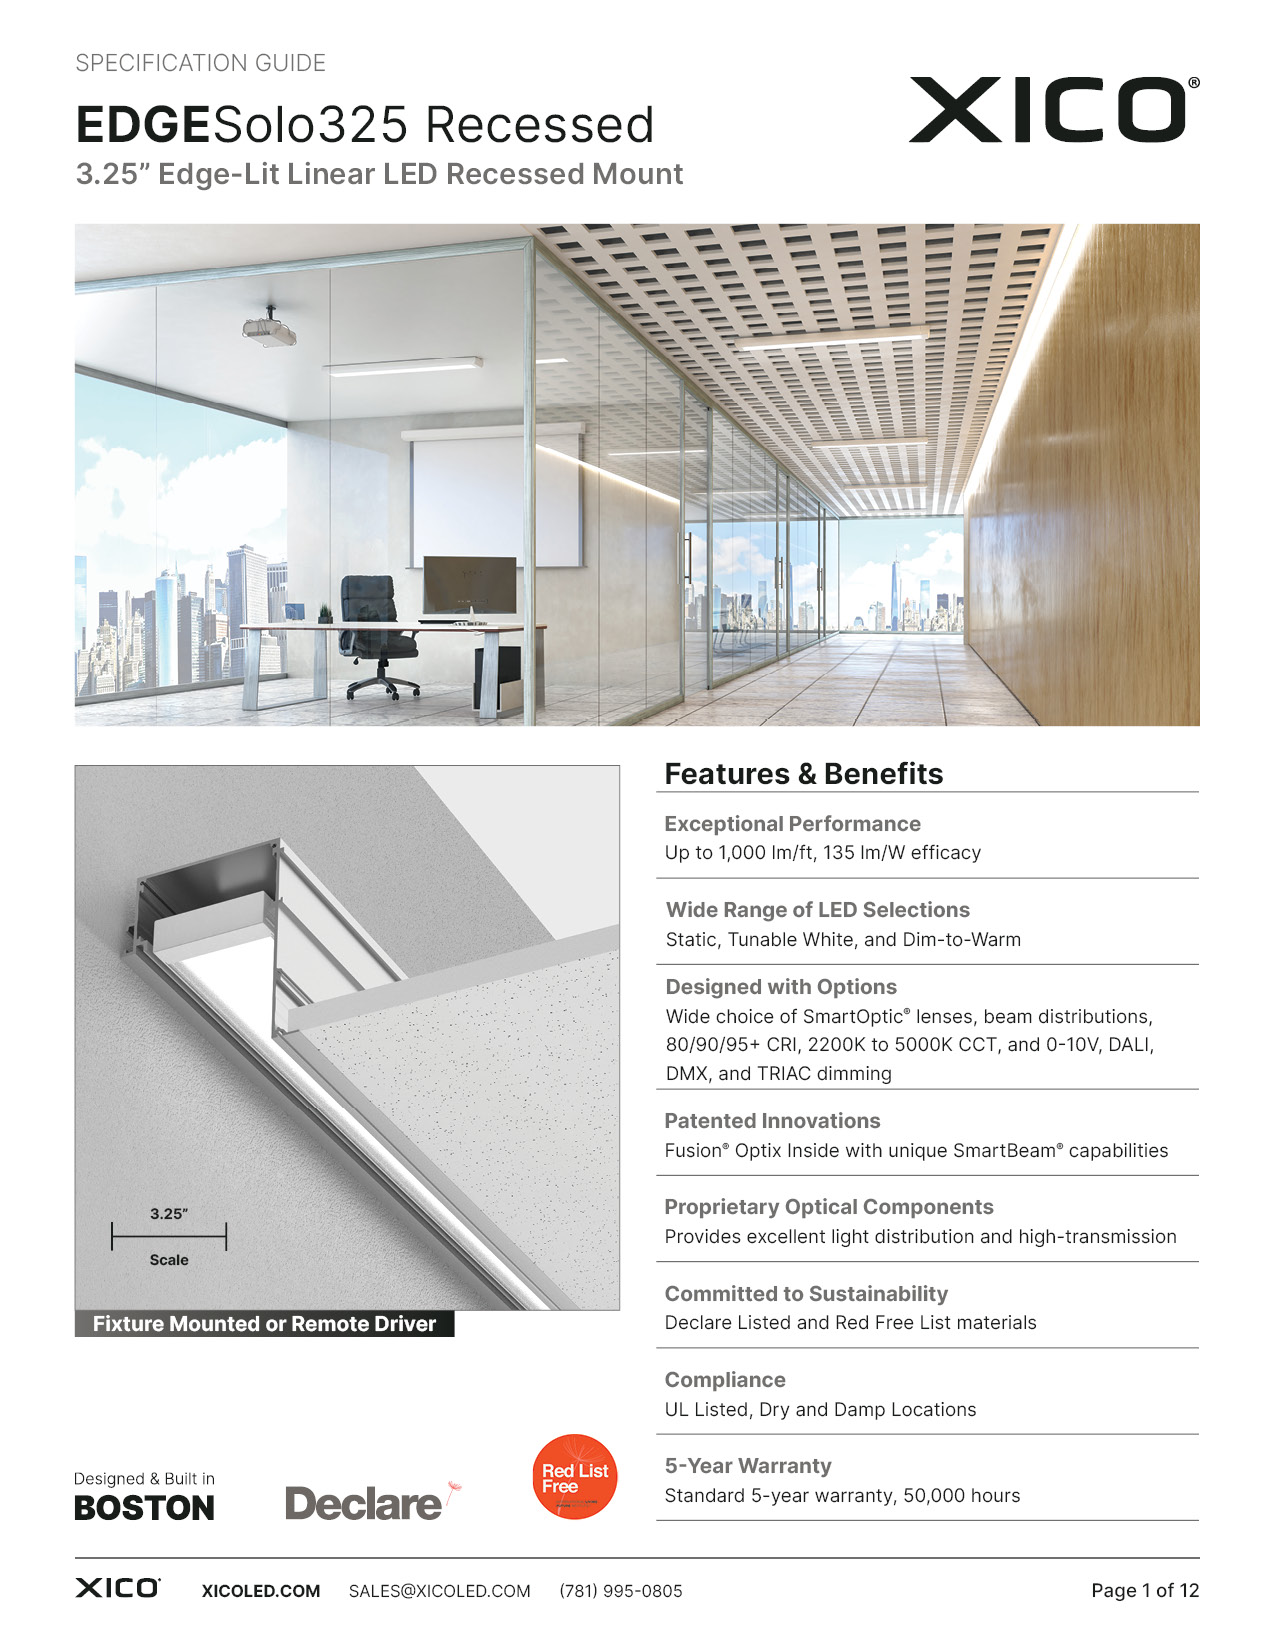 EDGESolo325 Recessed Specification Guide